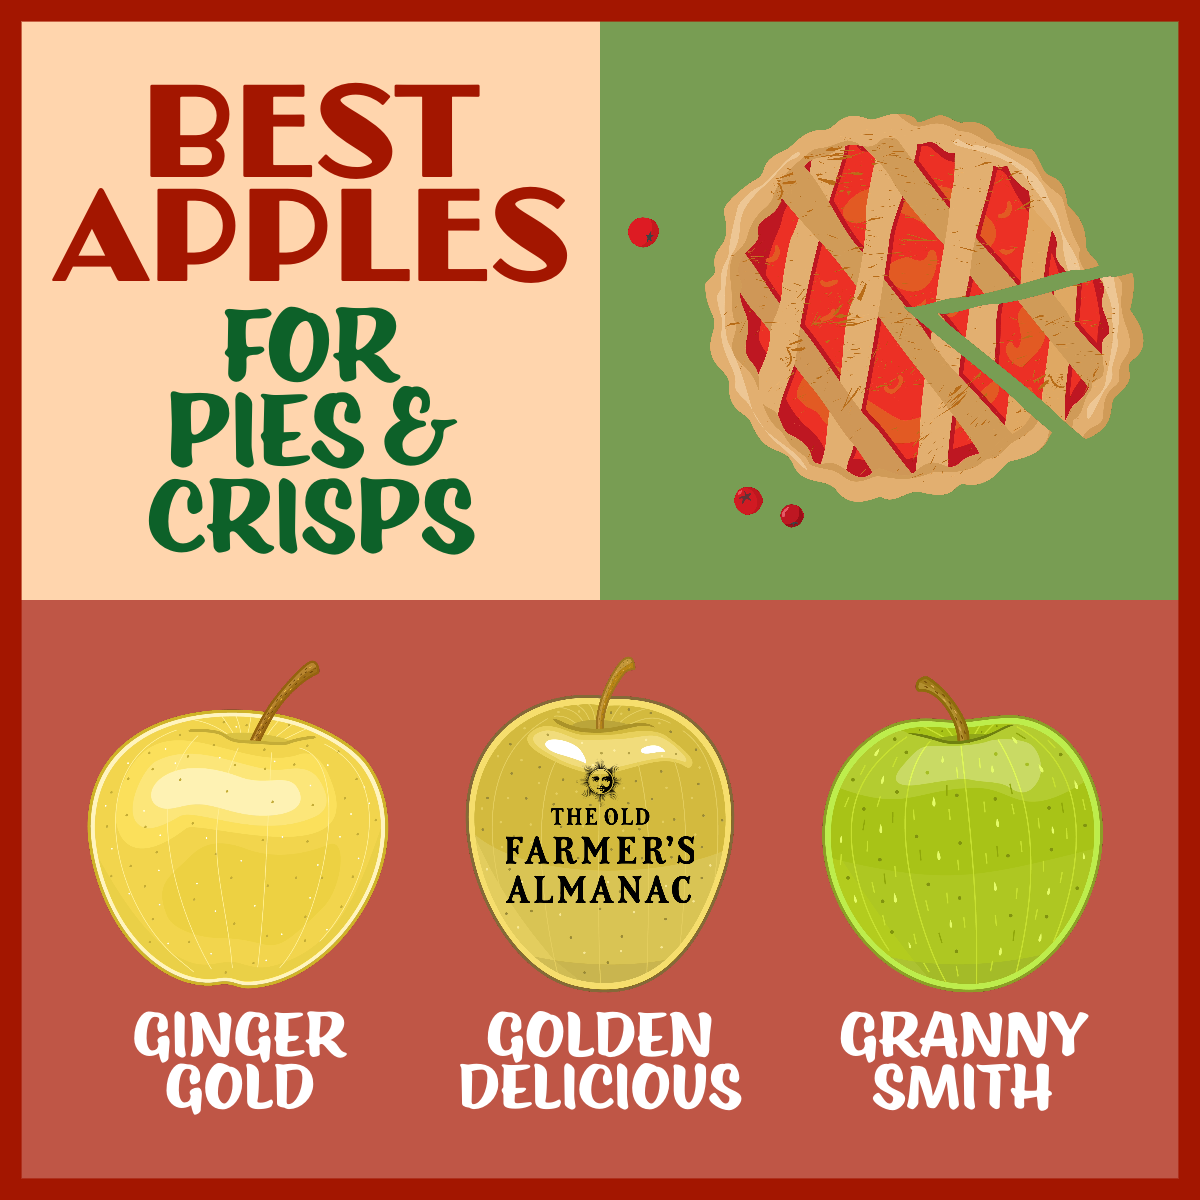 15 Different Types of Apples - Best Apples for Baking and Cooking